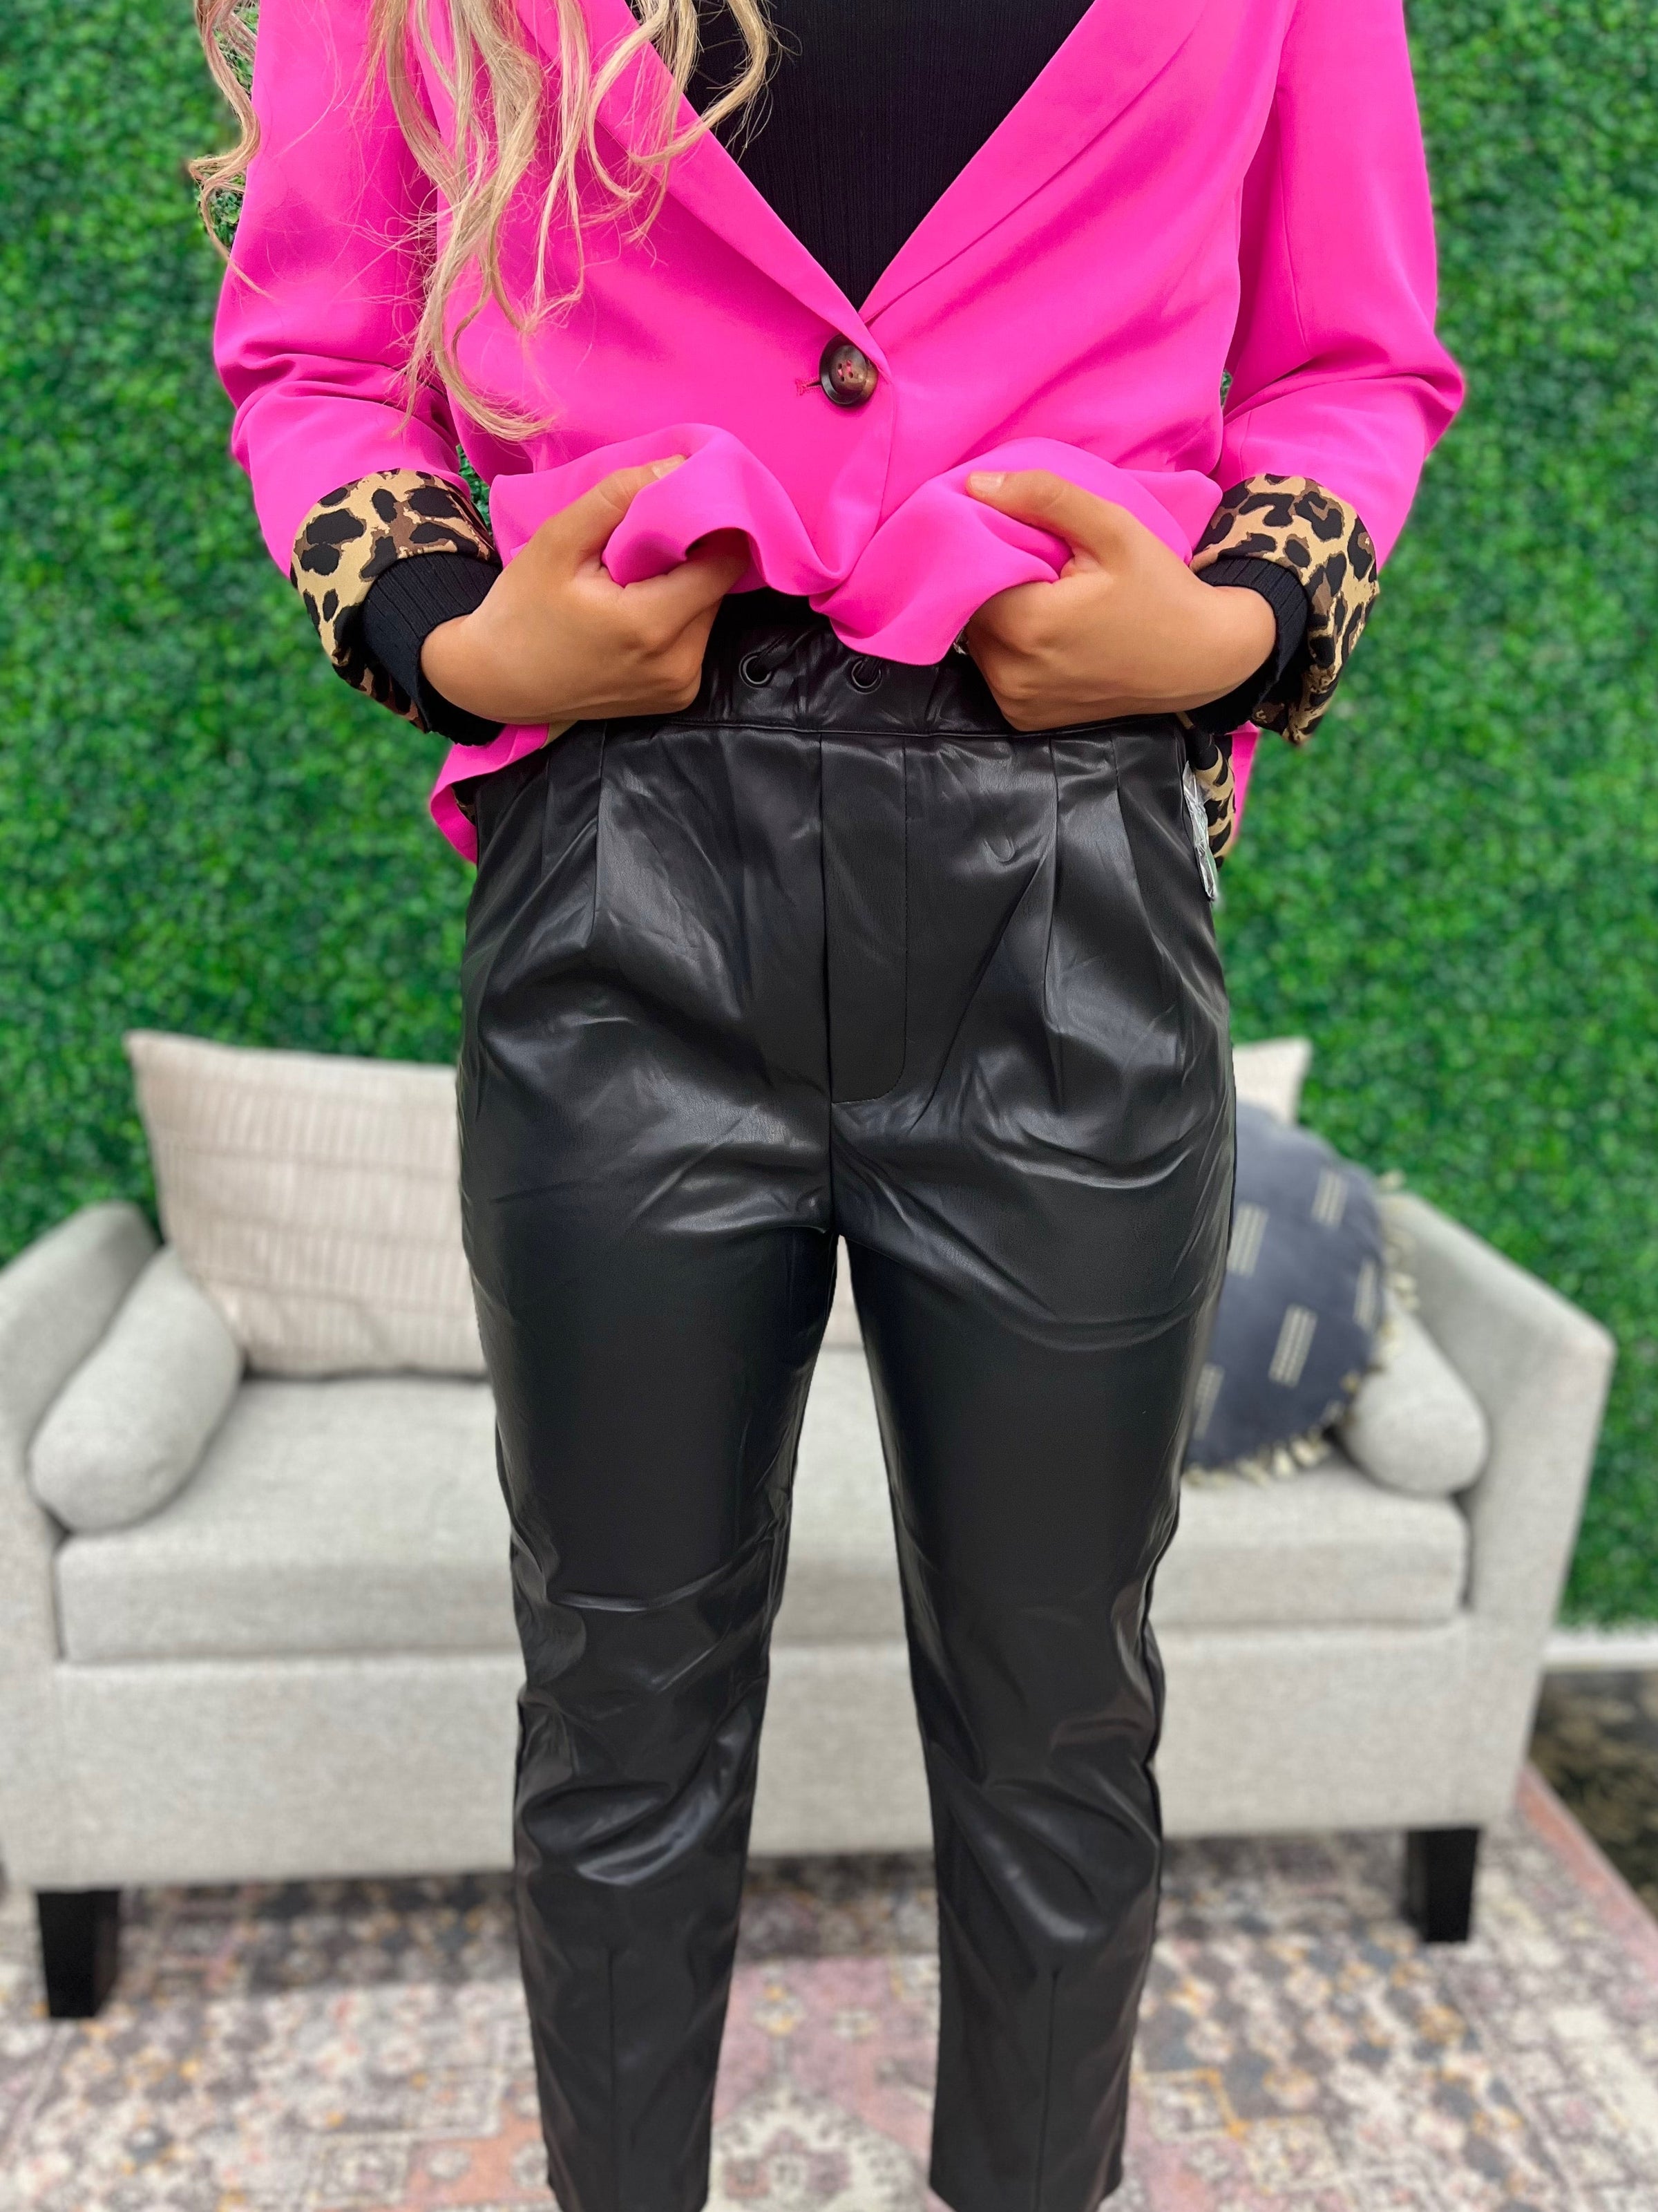 Paige DeSorbo's Pink Leather Pants